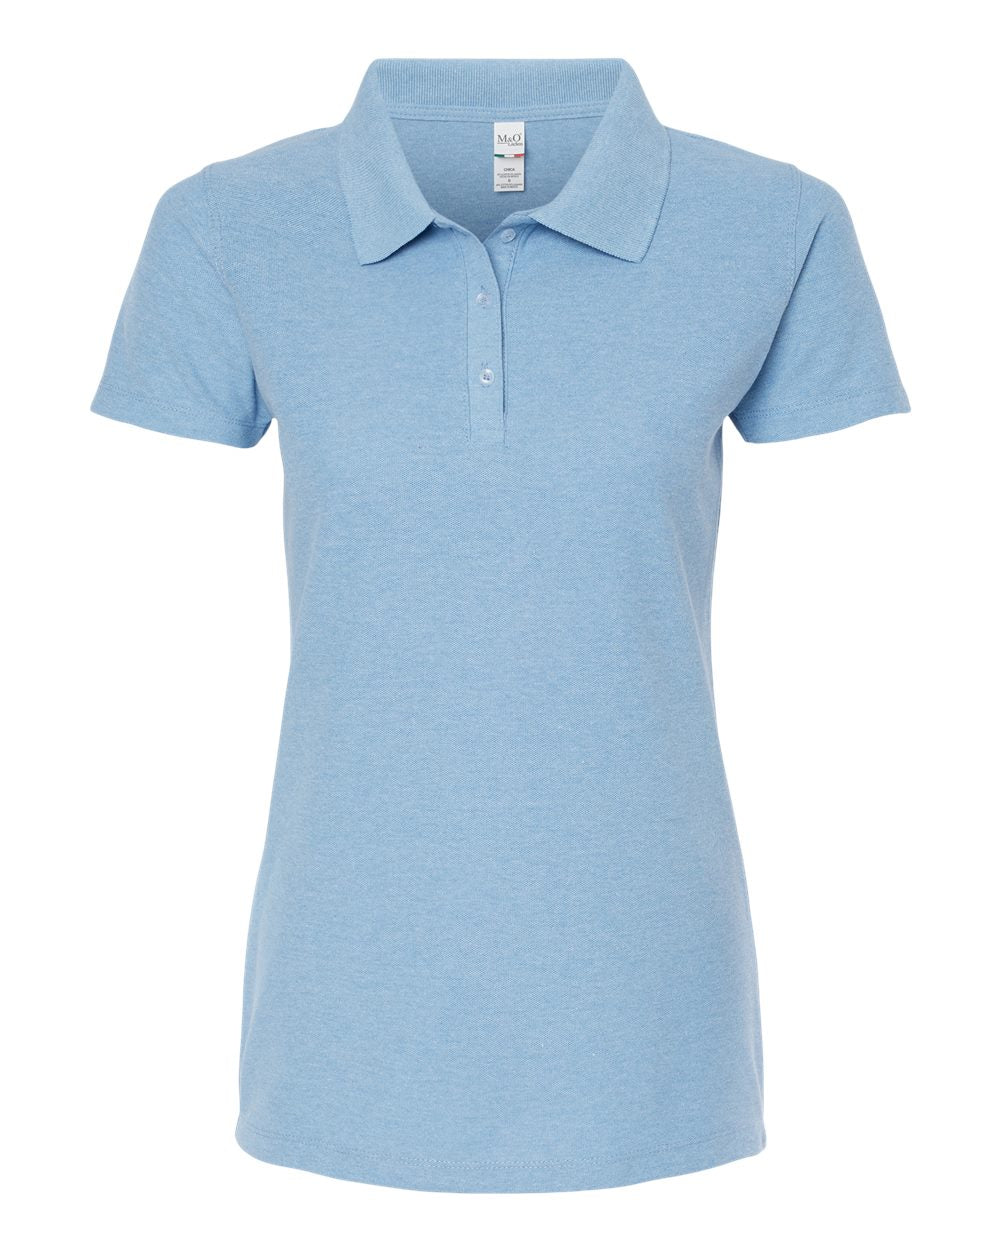 LADIES ADULT Unisex Fit POLO / GOLF shirt